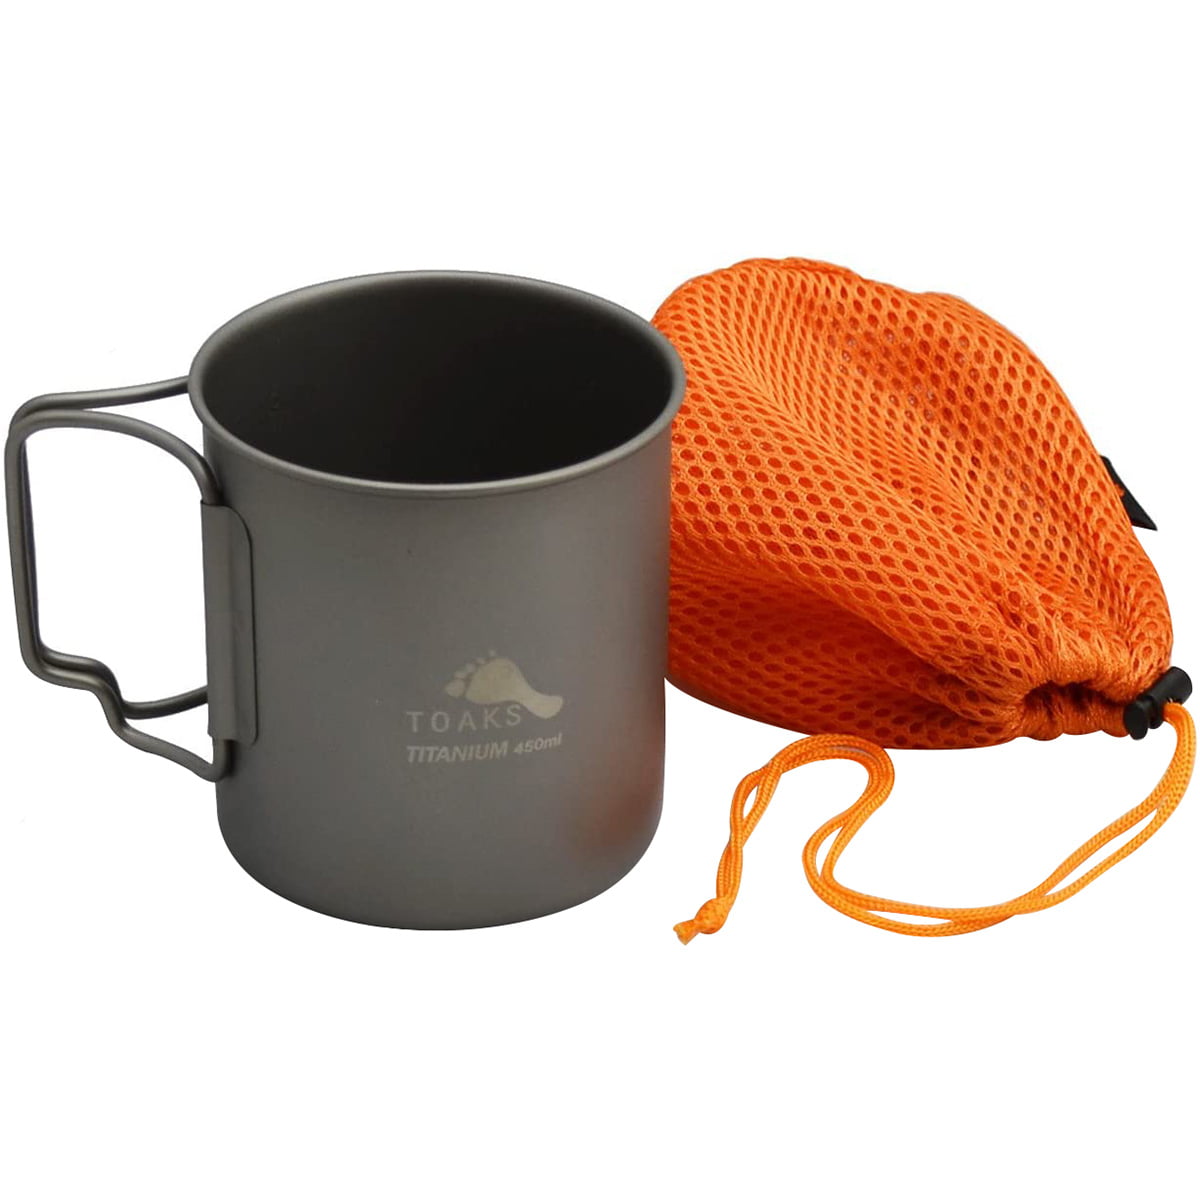 biking for hiking Titanium Coffee Cup Mug with Lid and Folding Cutlery Set Compact Durable 450 ml and everyday use camping